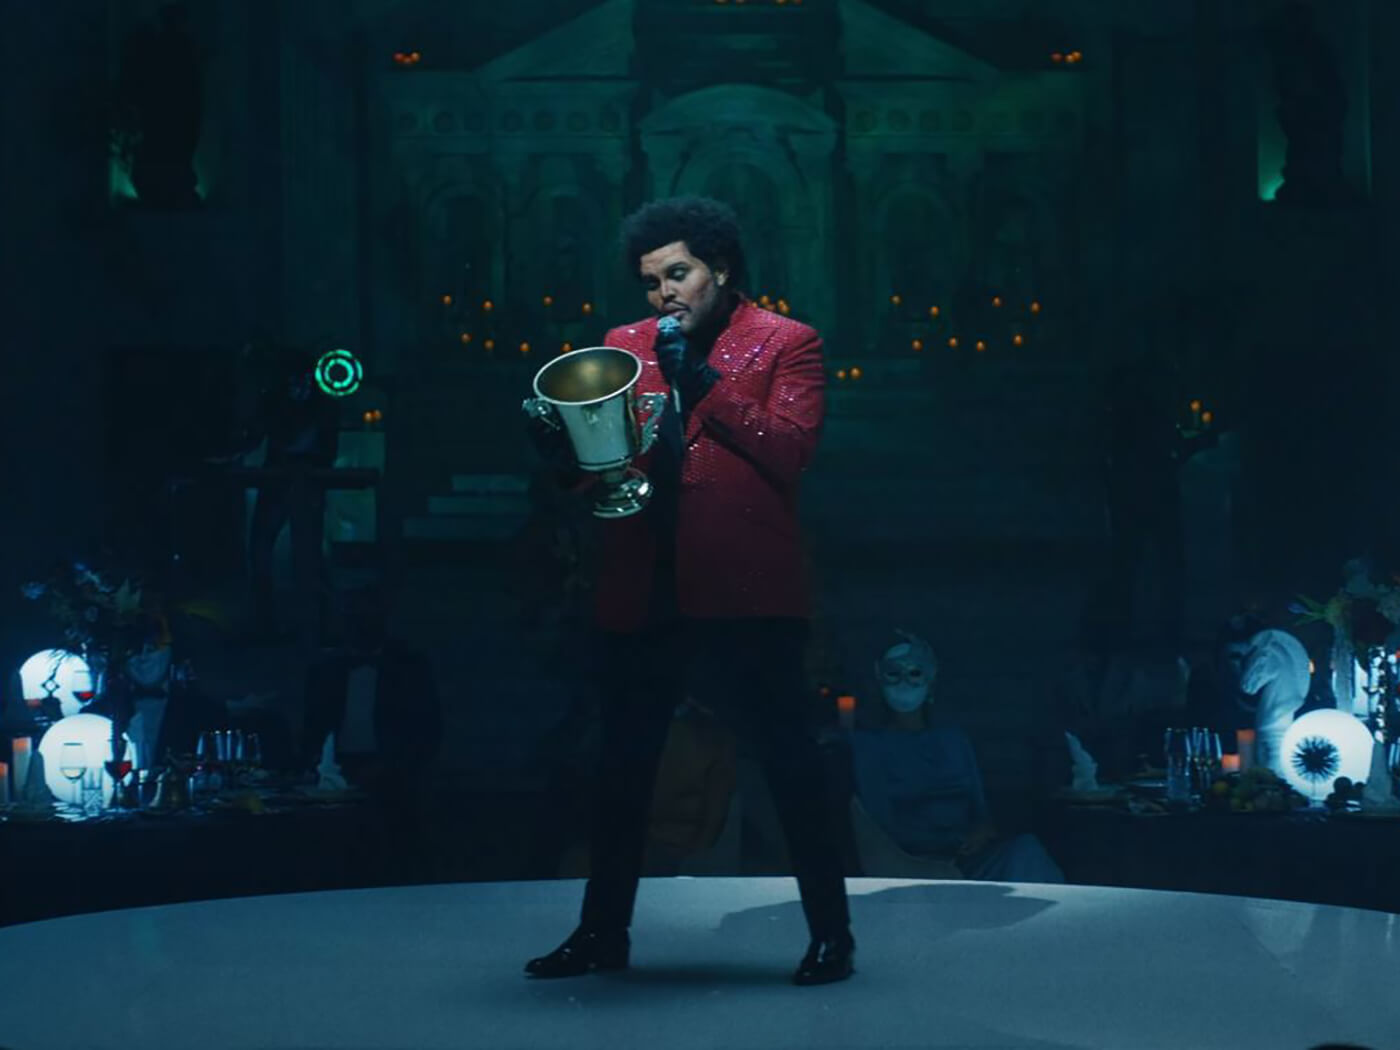 Watch The Weeknd's outlandish video for “Save Your Tears”